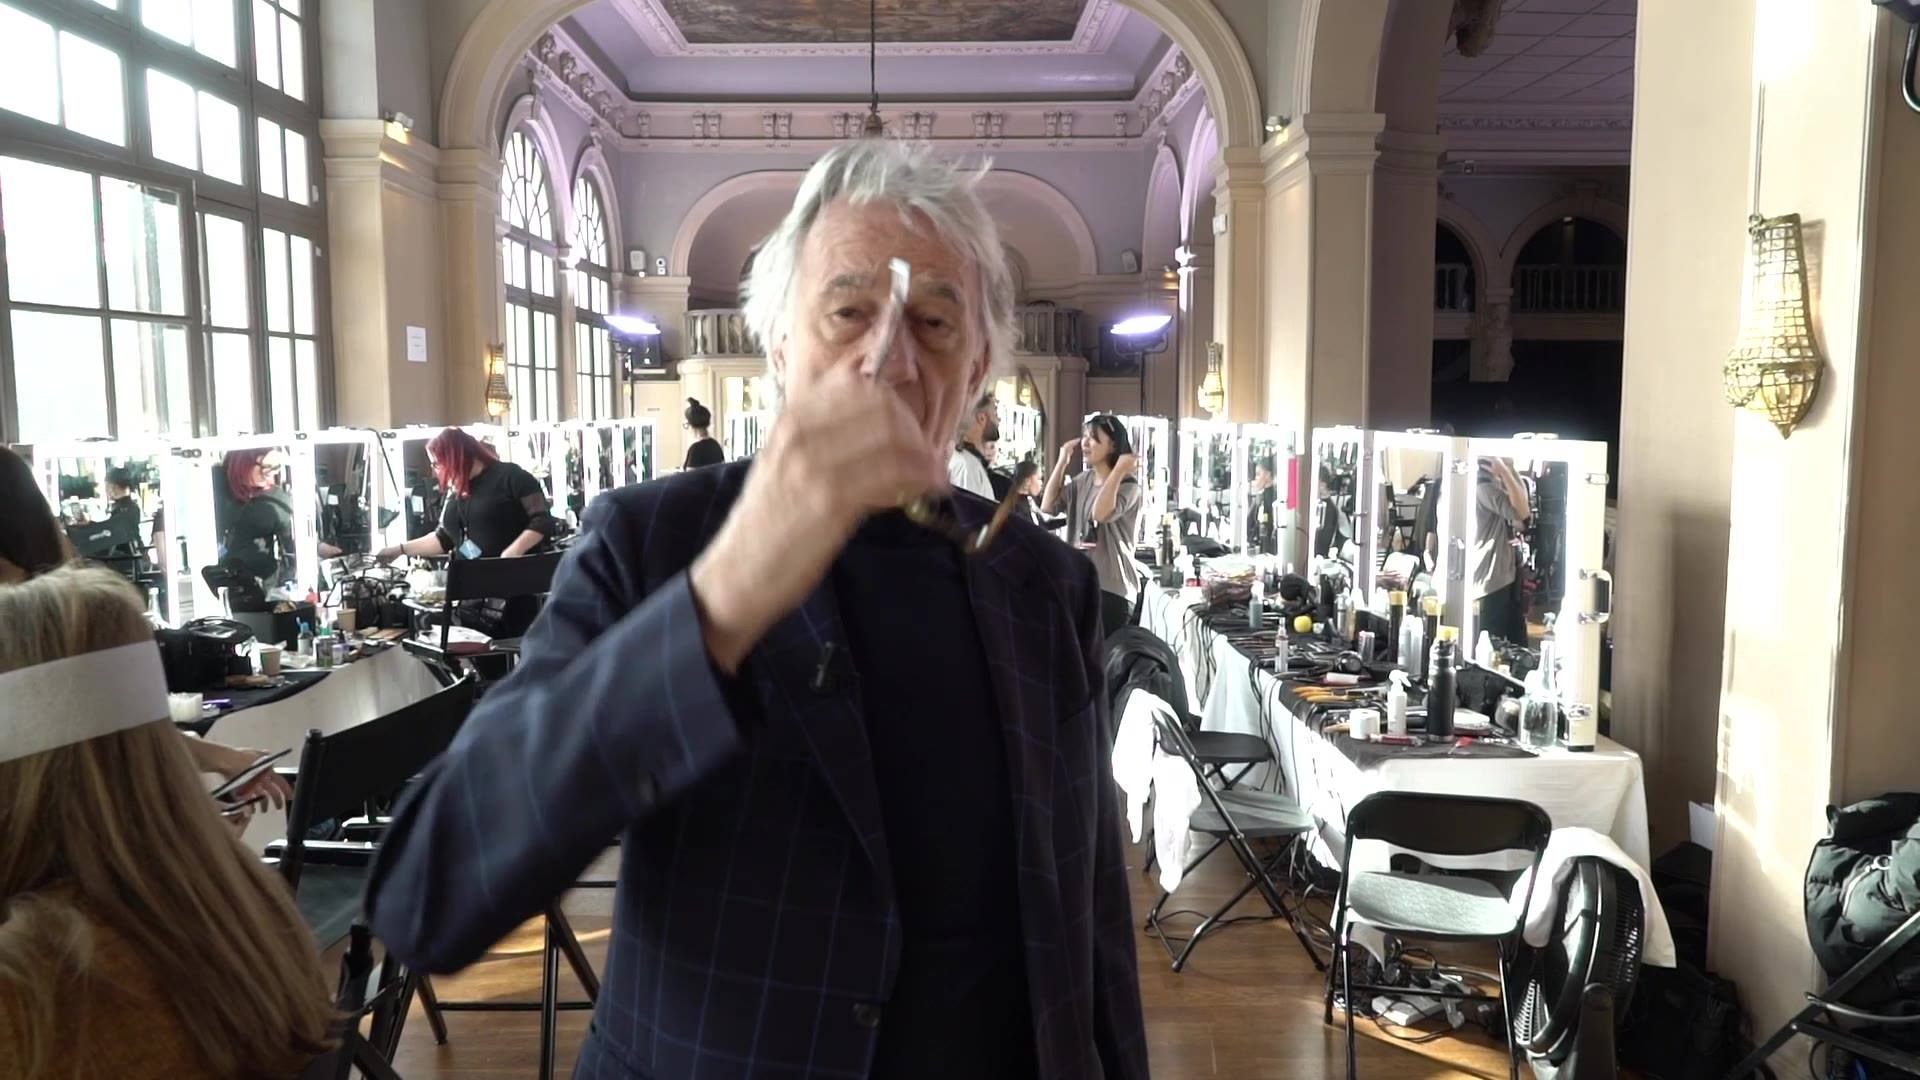 Join Paul backstage as he prepares for our 50th anniversary show.  >> twitter.com/paulsmithdesign